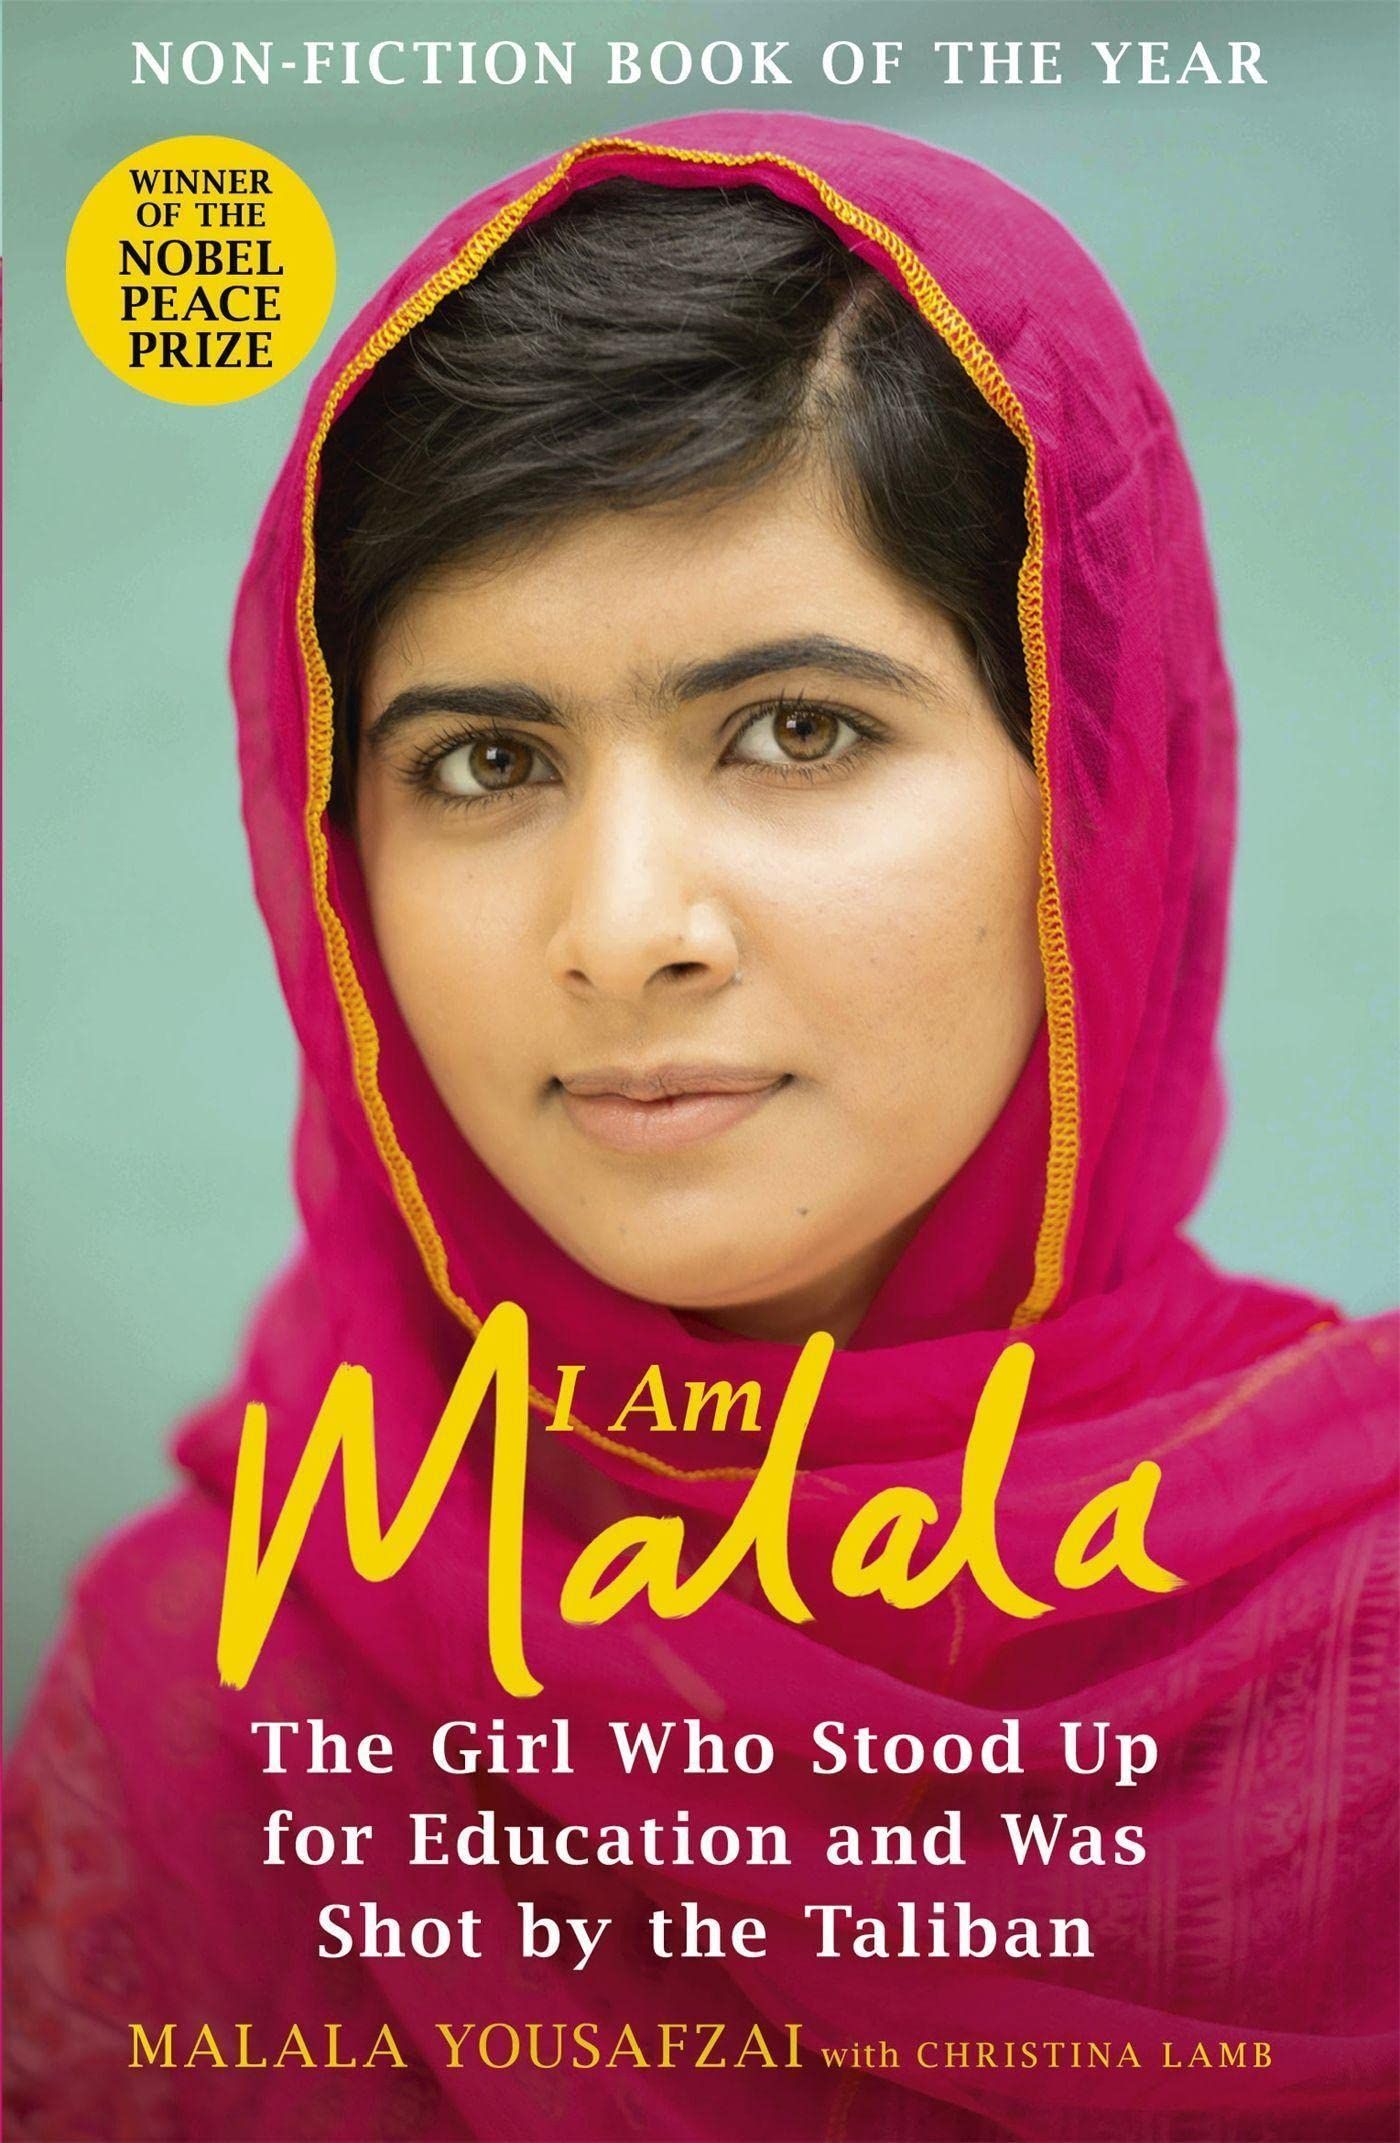 <p><strong>£7.08</strong></p><p><a href="https://www.amazon.co.uk/dp/1780226586">Shop Now</a></p><p>When the Taliban took control of the Swat Valley, there was one girl — Malala Yousafzai — that stood up for her right to an education. But it was on Tuesday 9th October, 2012, where her life flashed before her eyes, as she was shot point-blank in the head. Surviving this, she has gone on to become one of the world's most inspirational female activists. And this book reveals all of what she went through. </p>